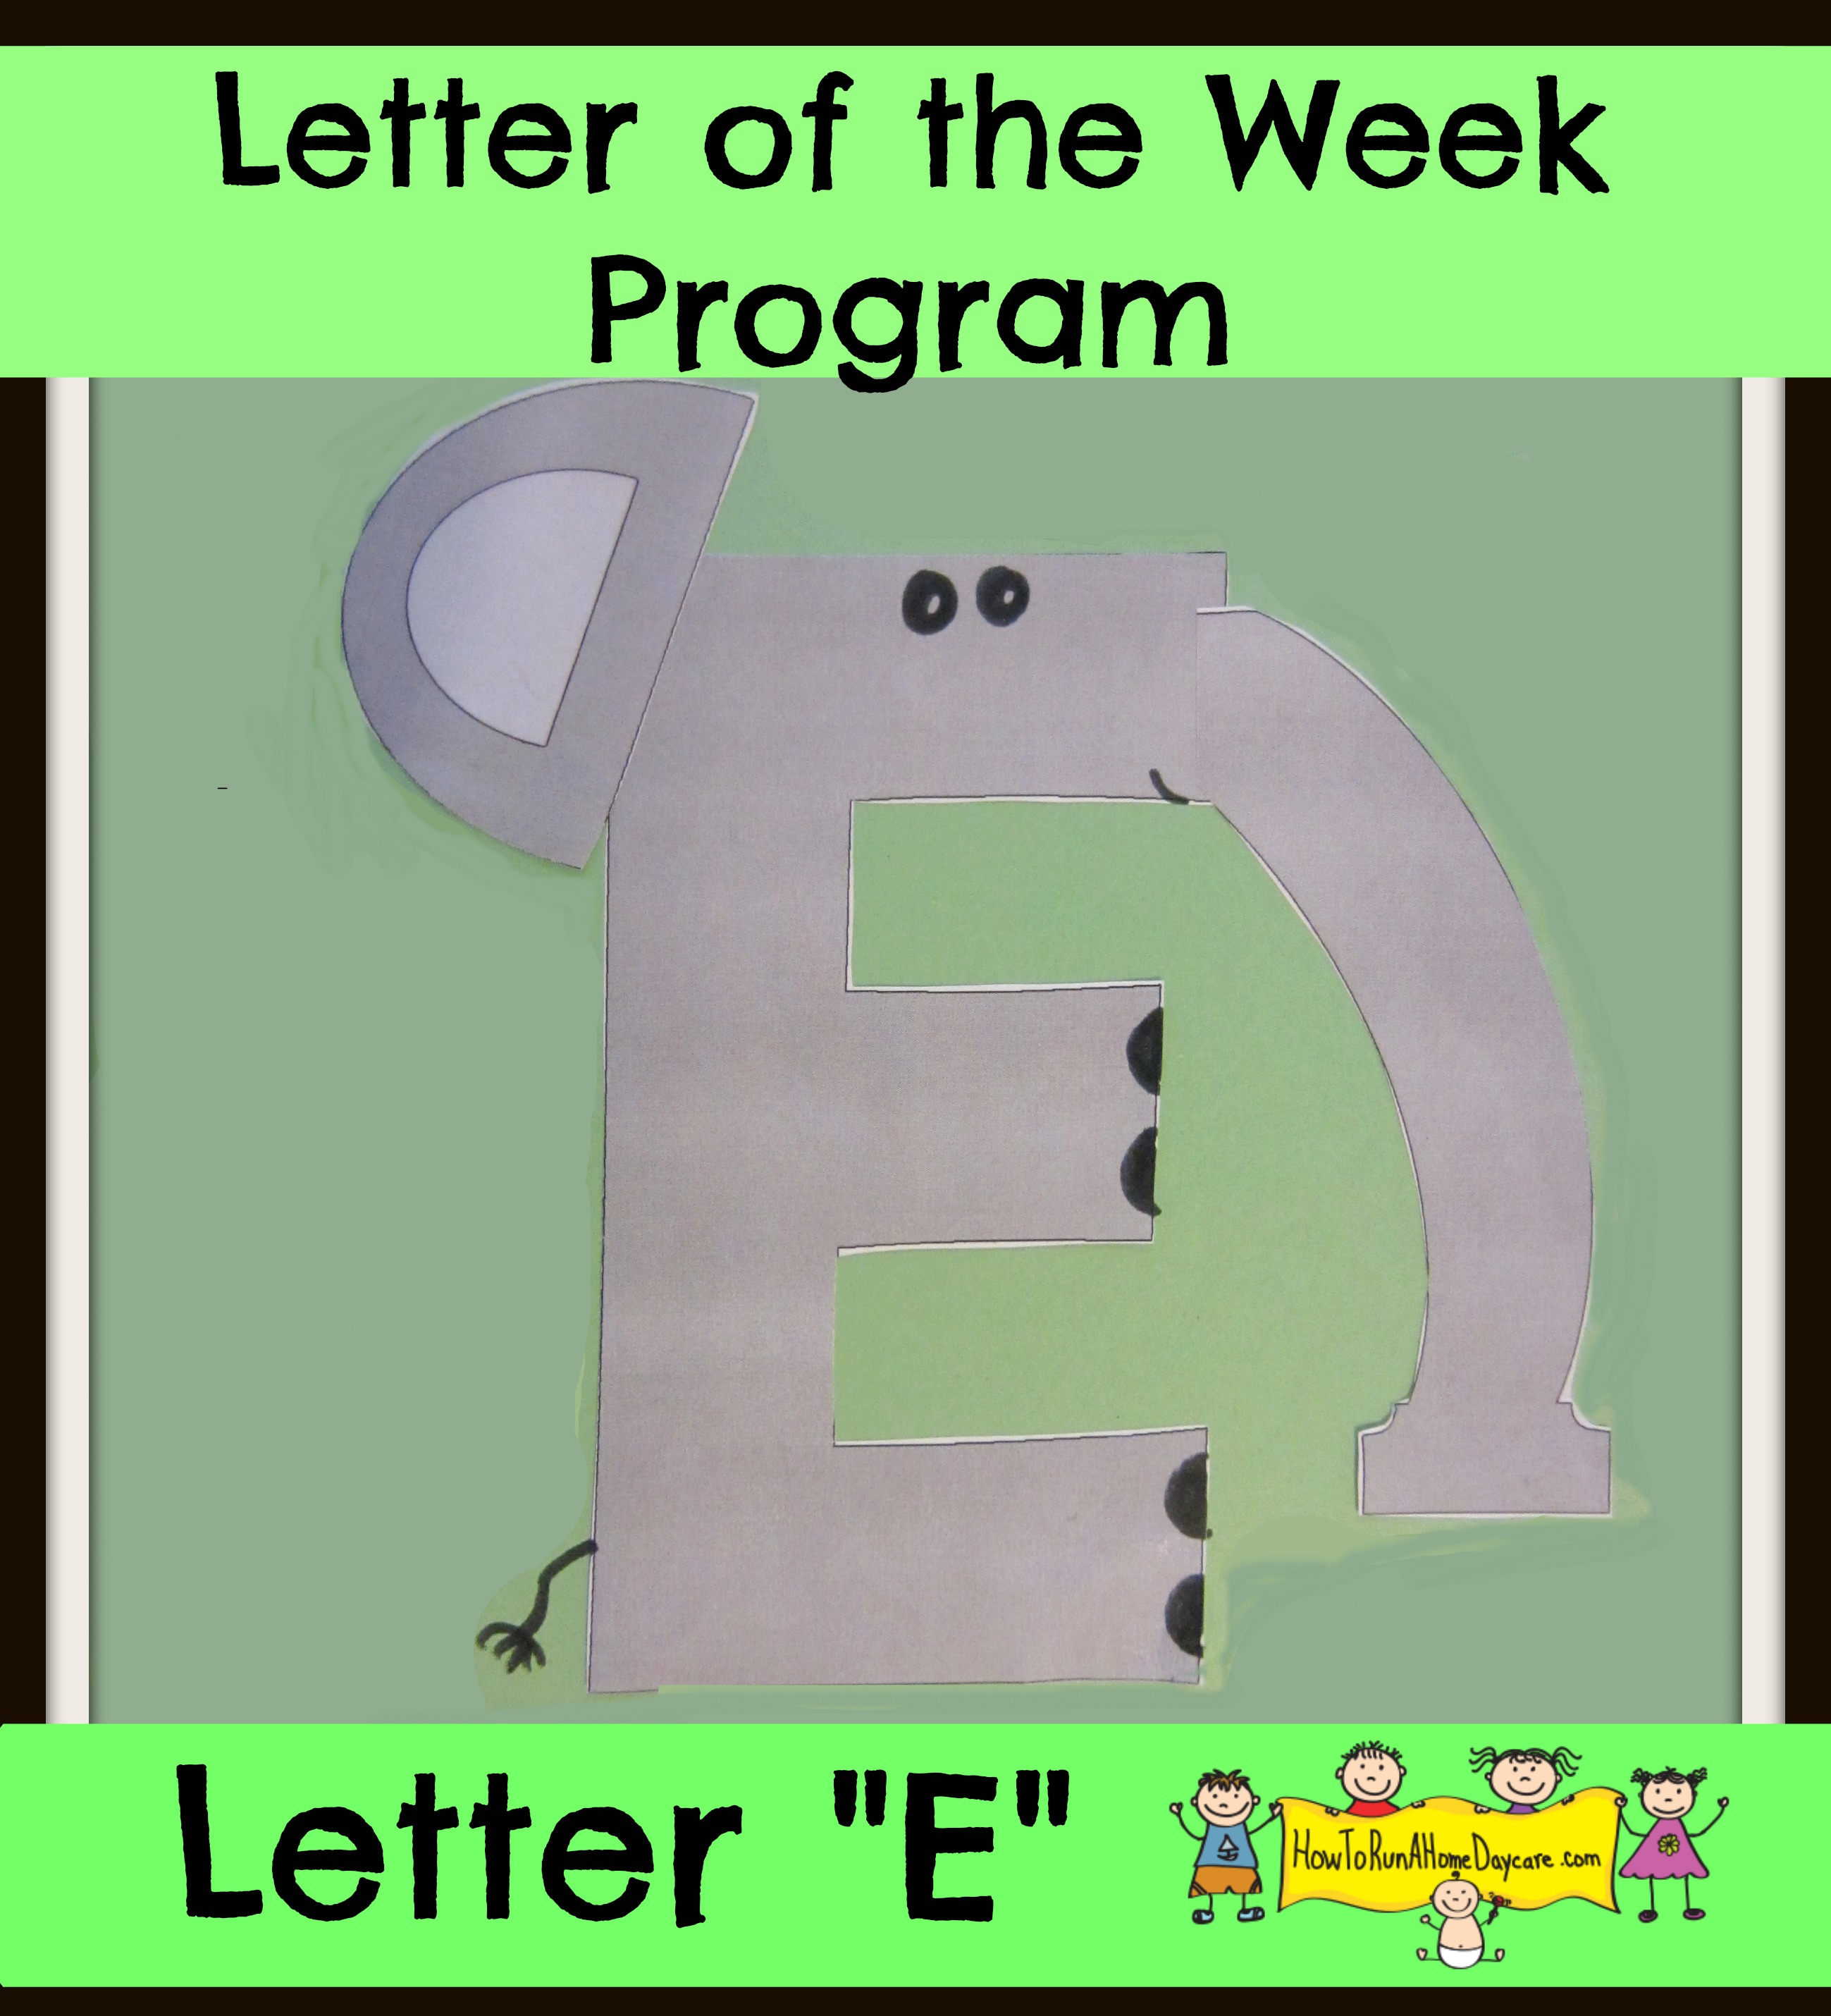 Letter E -Letter of the Week Program- part 1 - How To Run A Home